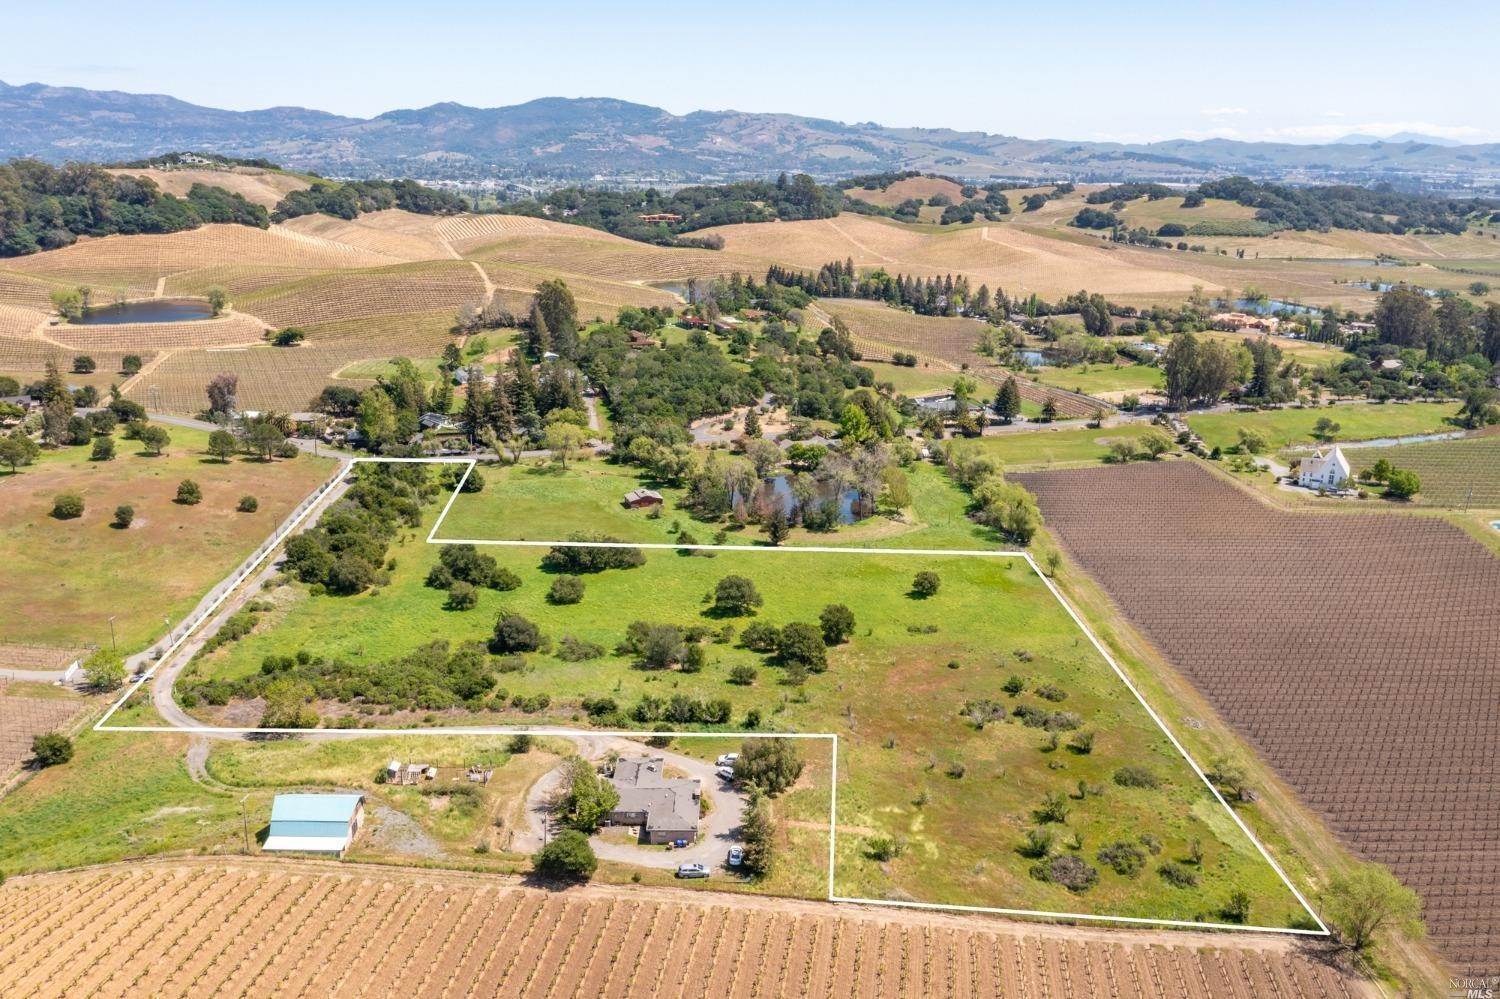 Agricultural Land for Sale at Thompson Avenue Napa, California 94558 United States